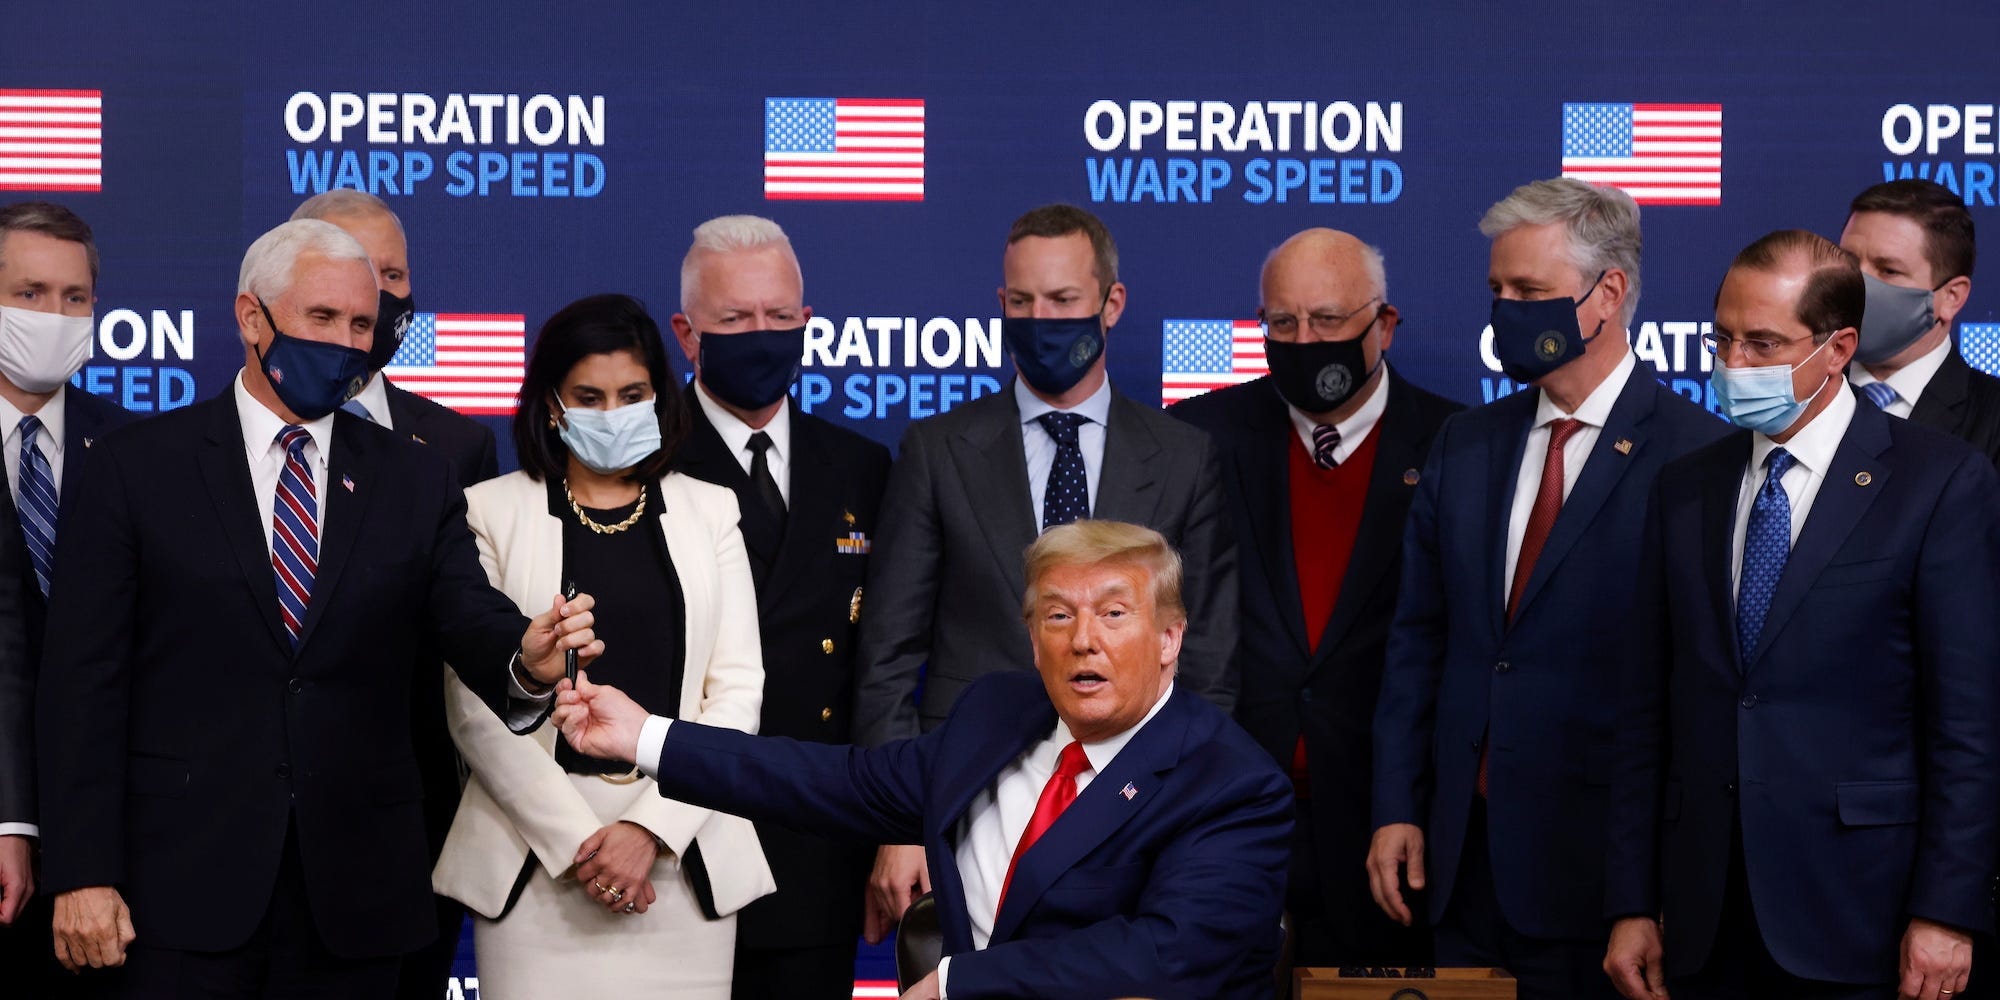 Former President Donald Trump signs an executive order on vaccine distribution at an Operation Warp Speed event on December 8, 2020.